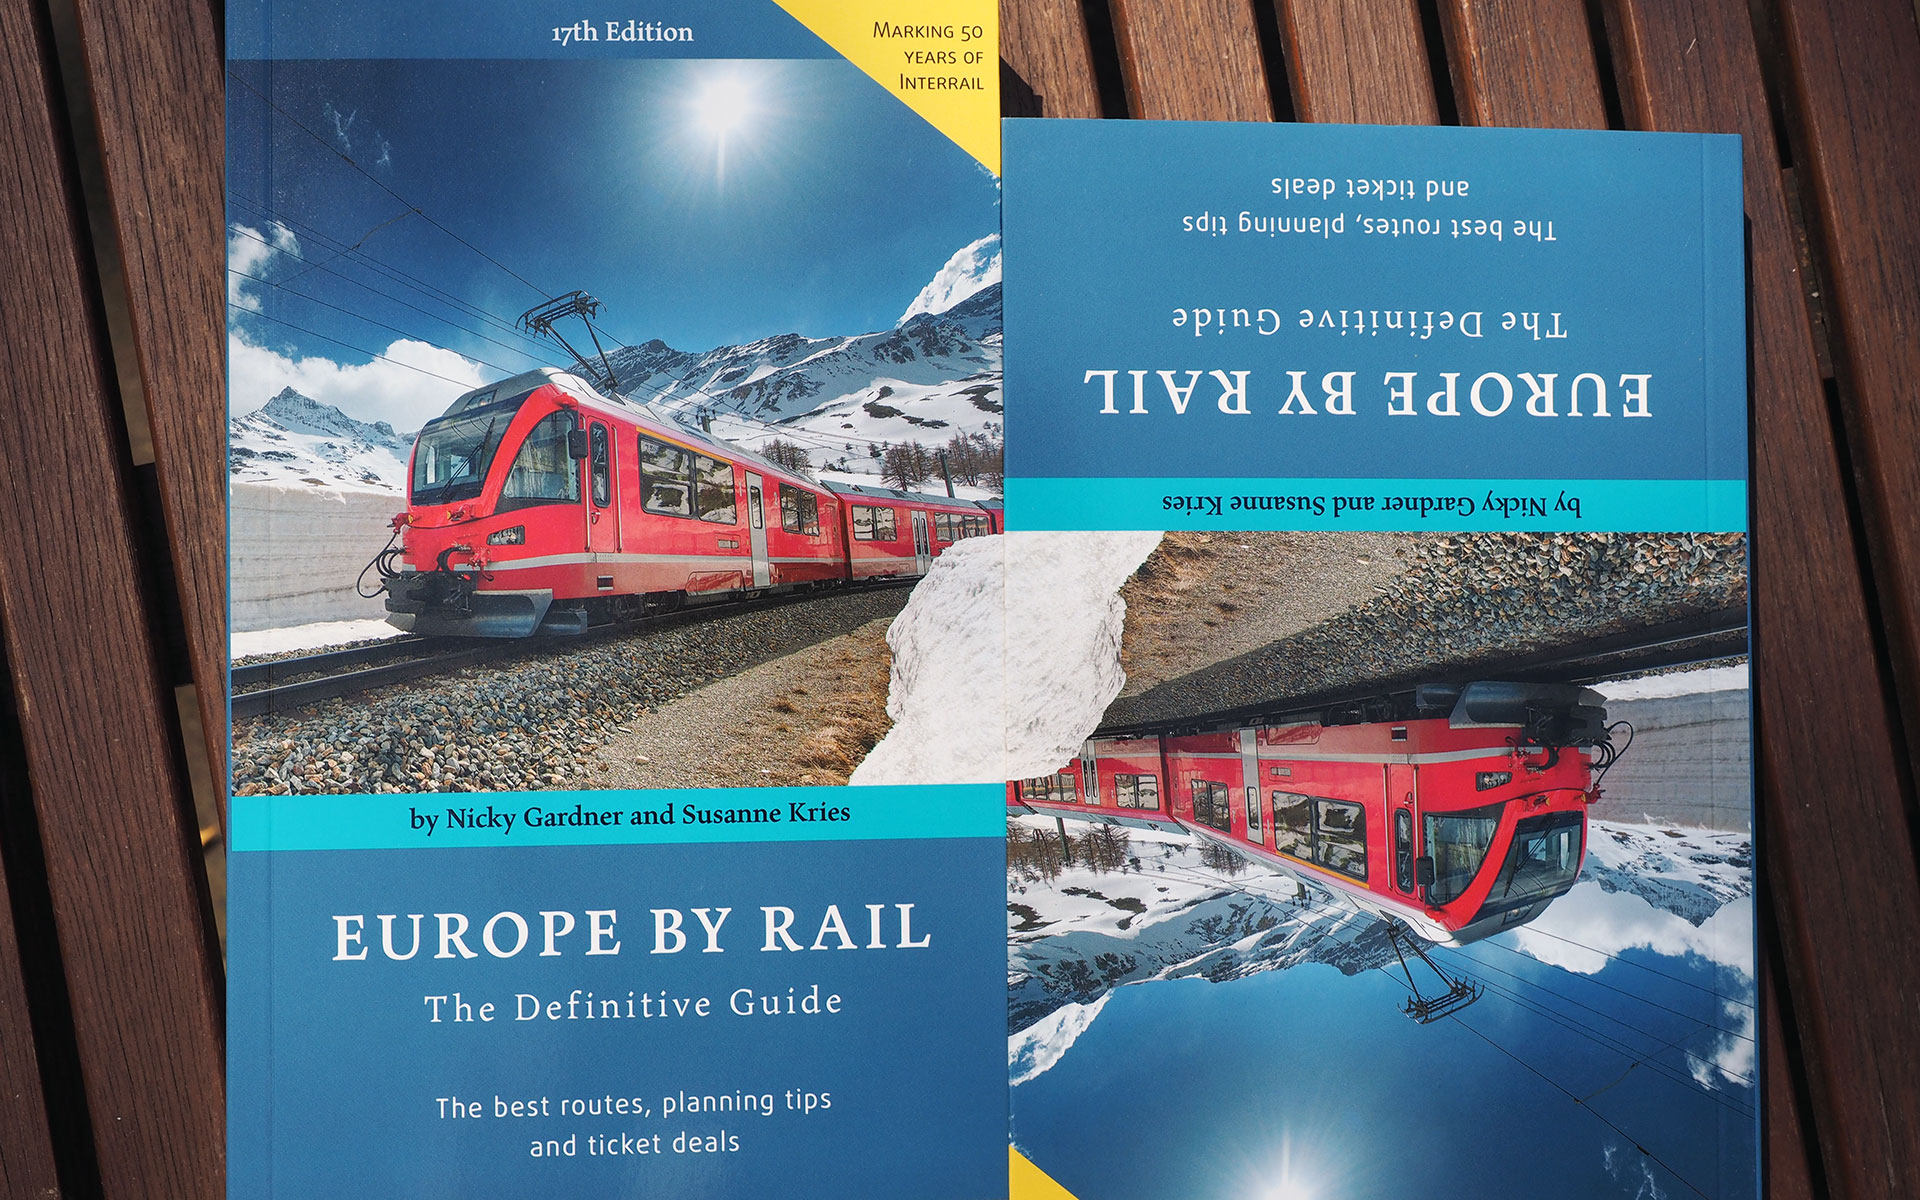 The 17th edition of Europe by Rail has just been reprinted